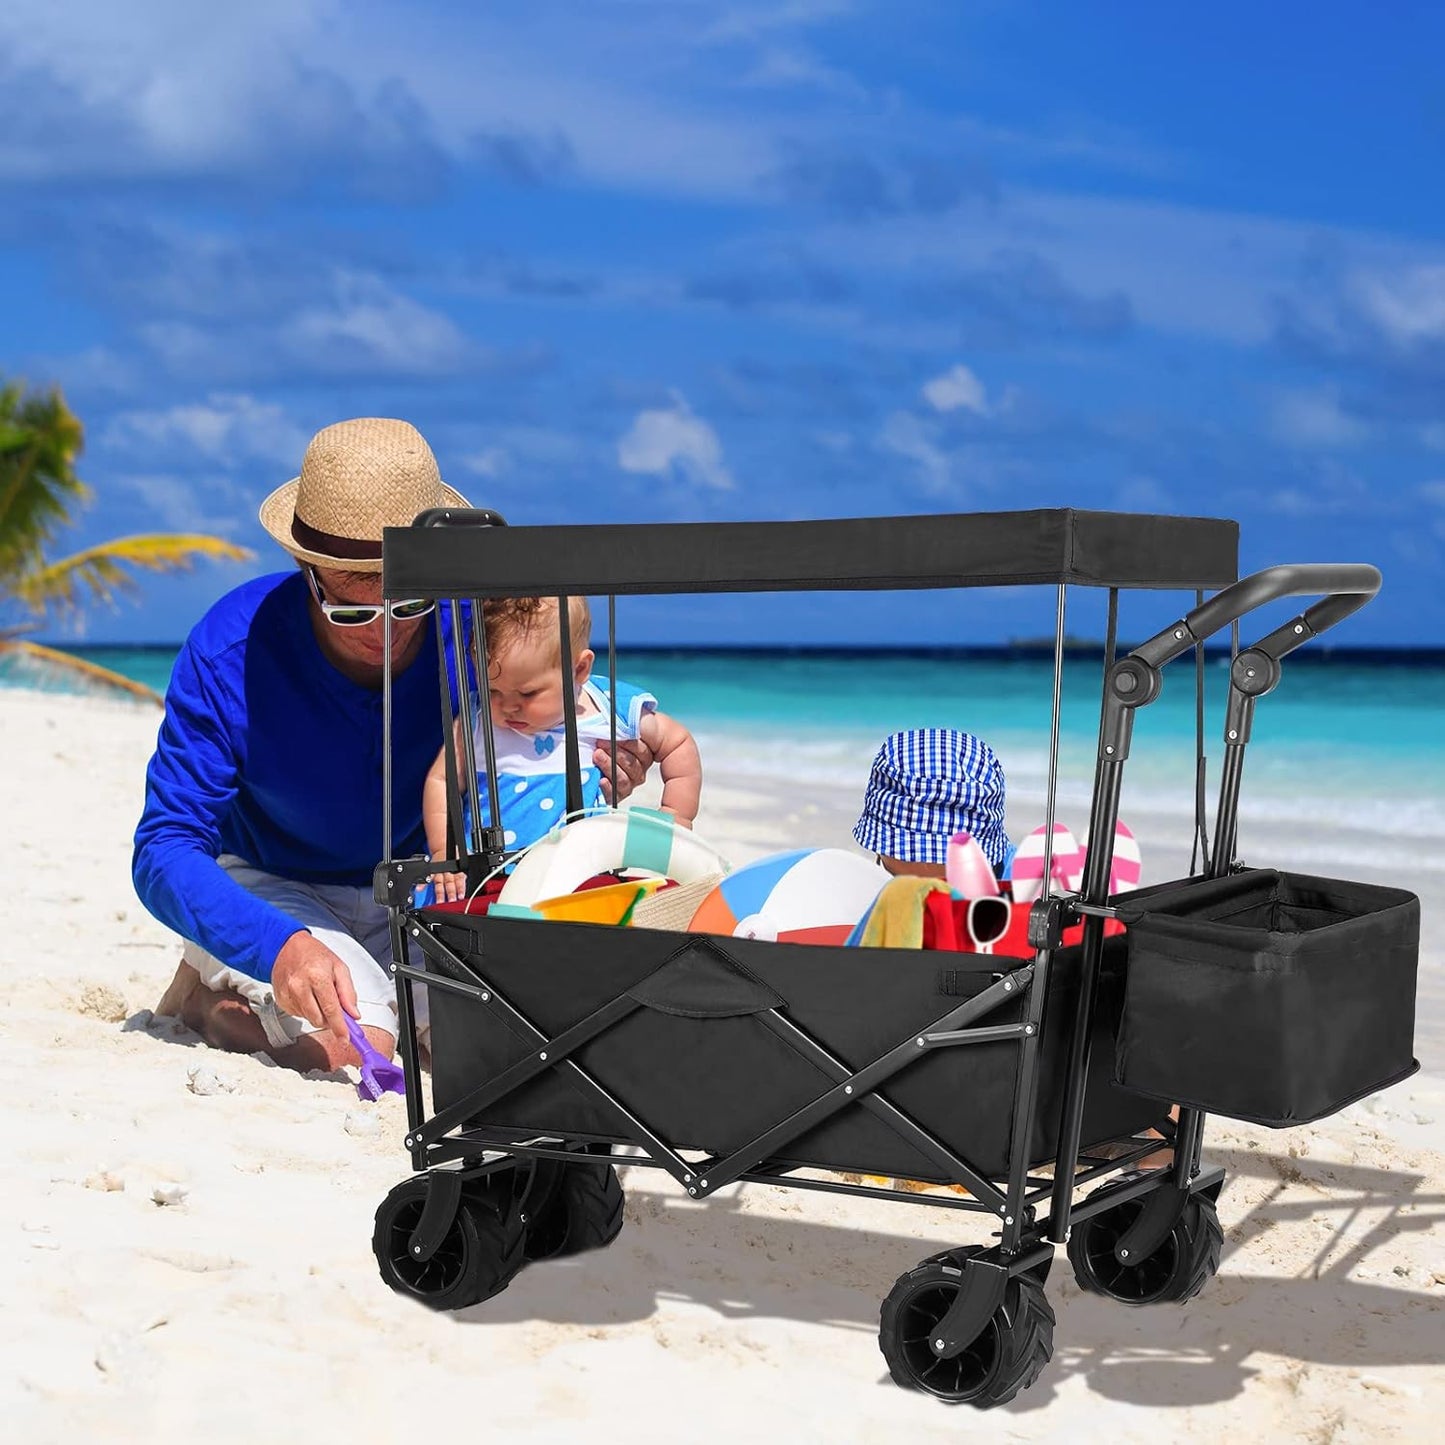 Arlopu Foldable Utility Wagon Cart Beach Utilit Cart with Removable Canopy